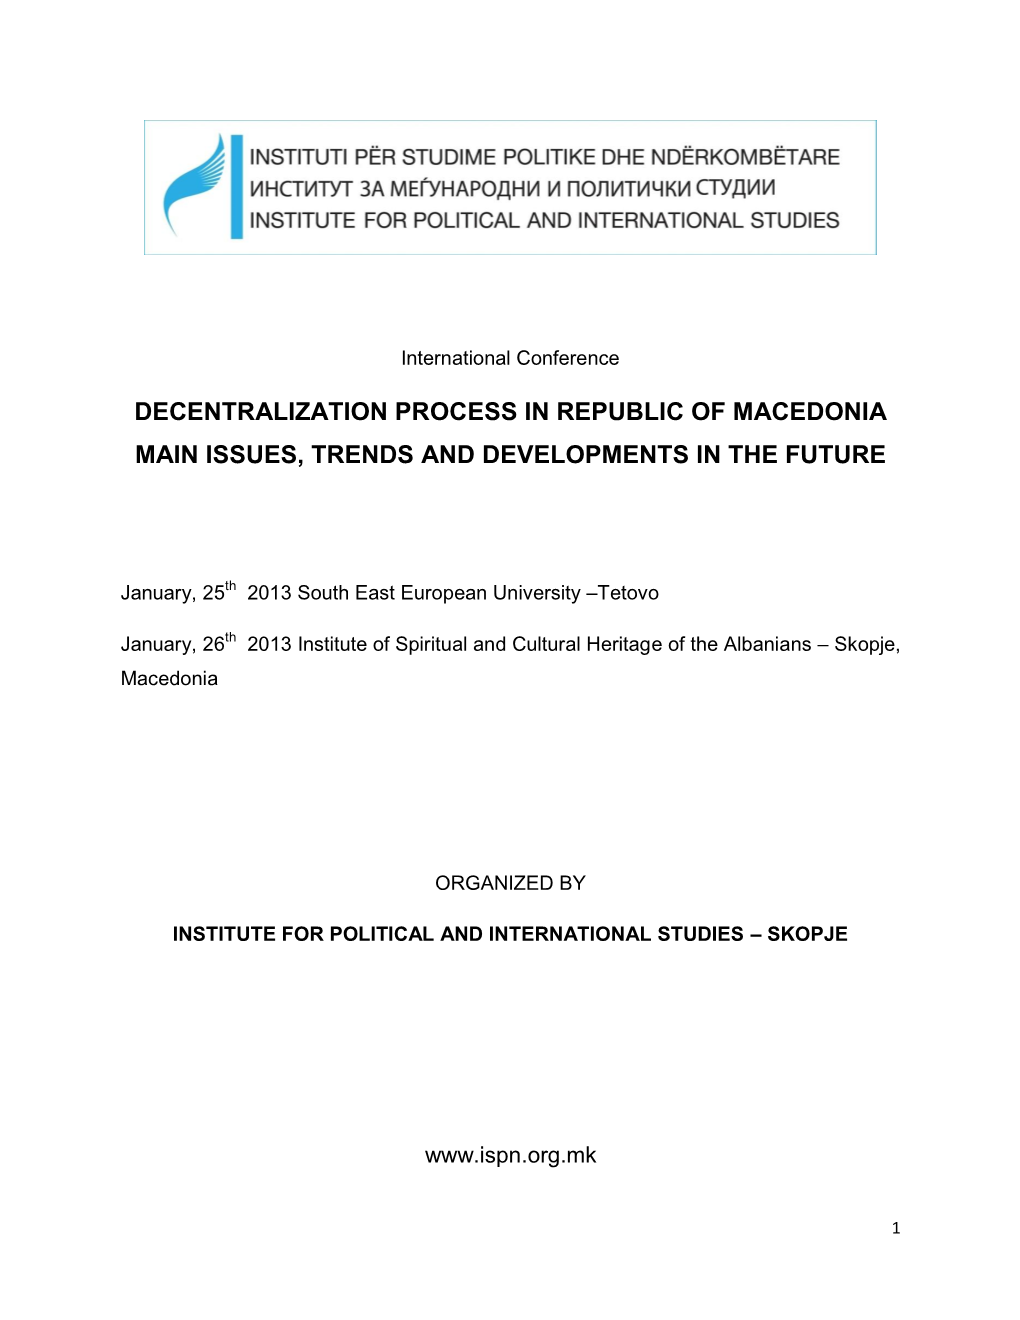 Decentralization Process in Republic of Macedonia, Main Issues, Trends